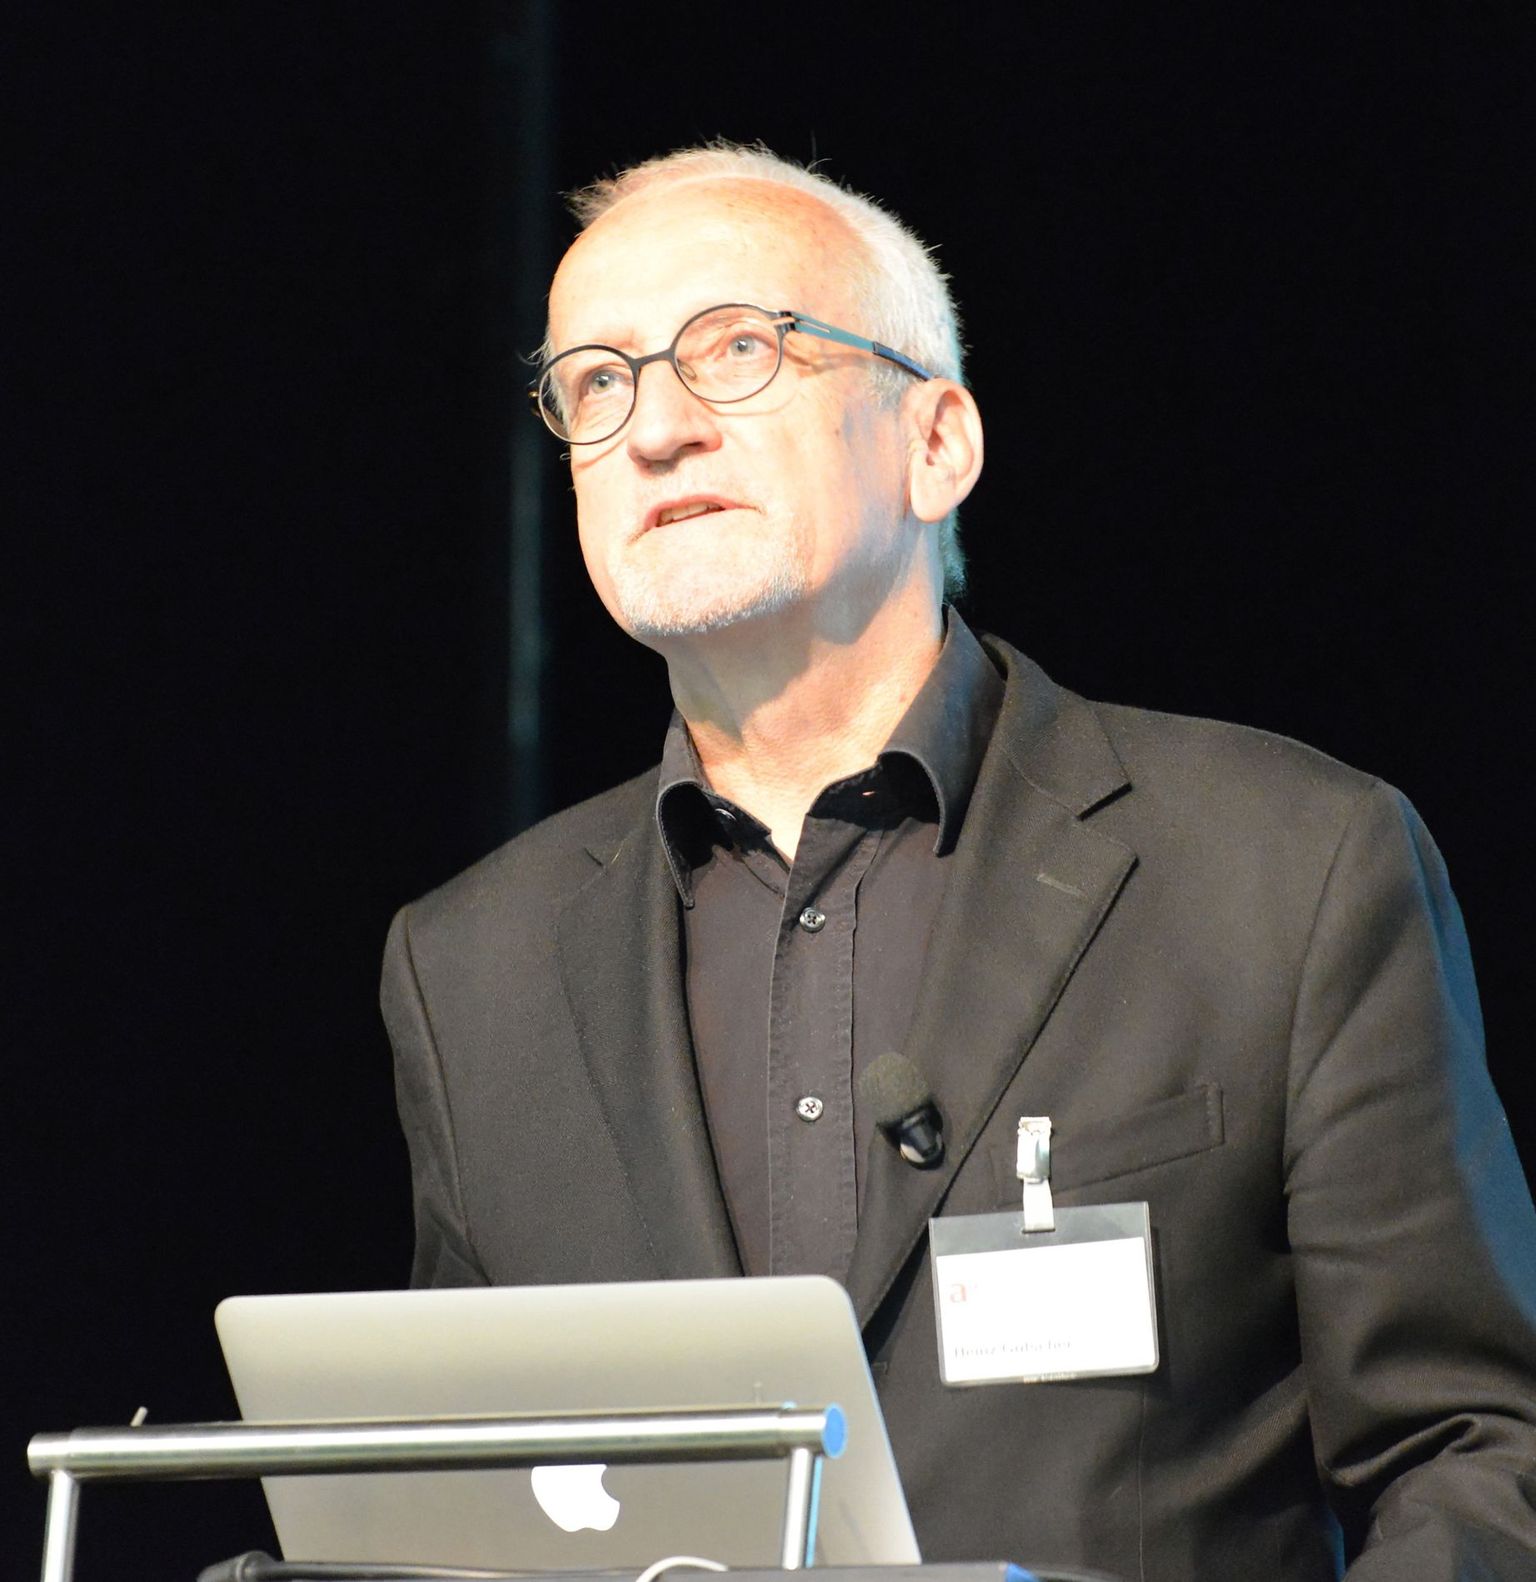 Future Earth description and Draft Science Plan: Heinz Gutscher elected into the Scientific Steering Committee of Future Earth